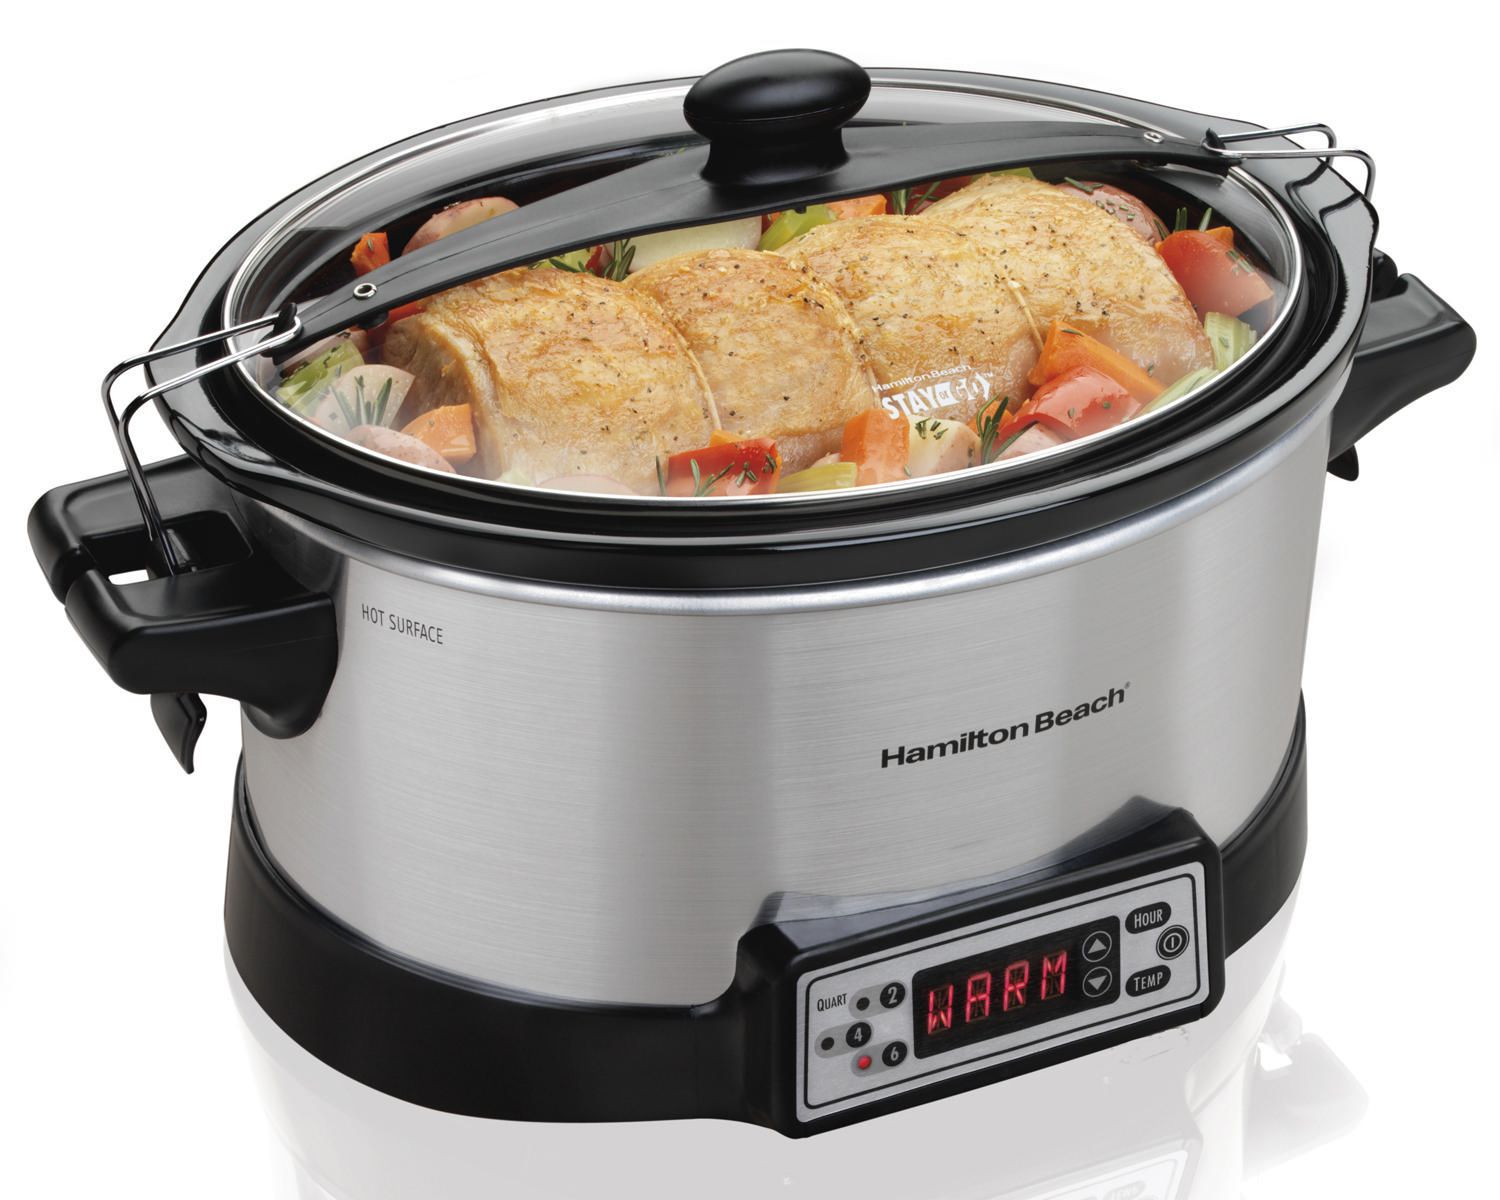  Hamilton Beach Stay or Go Programmable 7 Qt. Slow Cooker with  Party Dipper 33478: Home & Kitchen